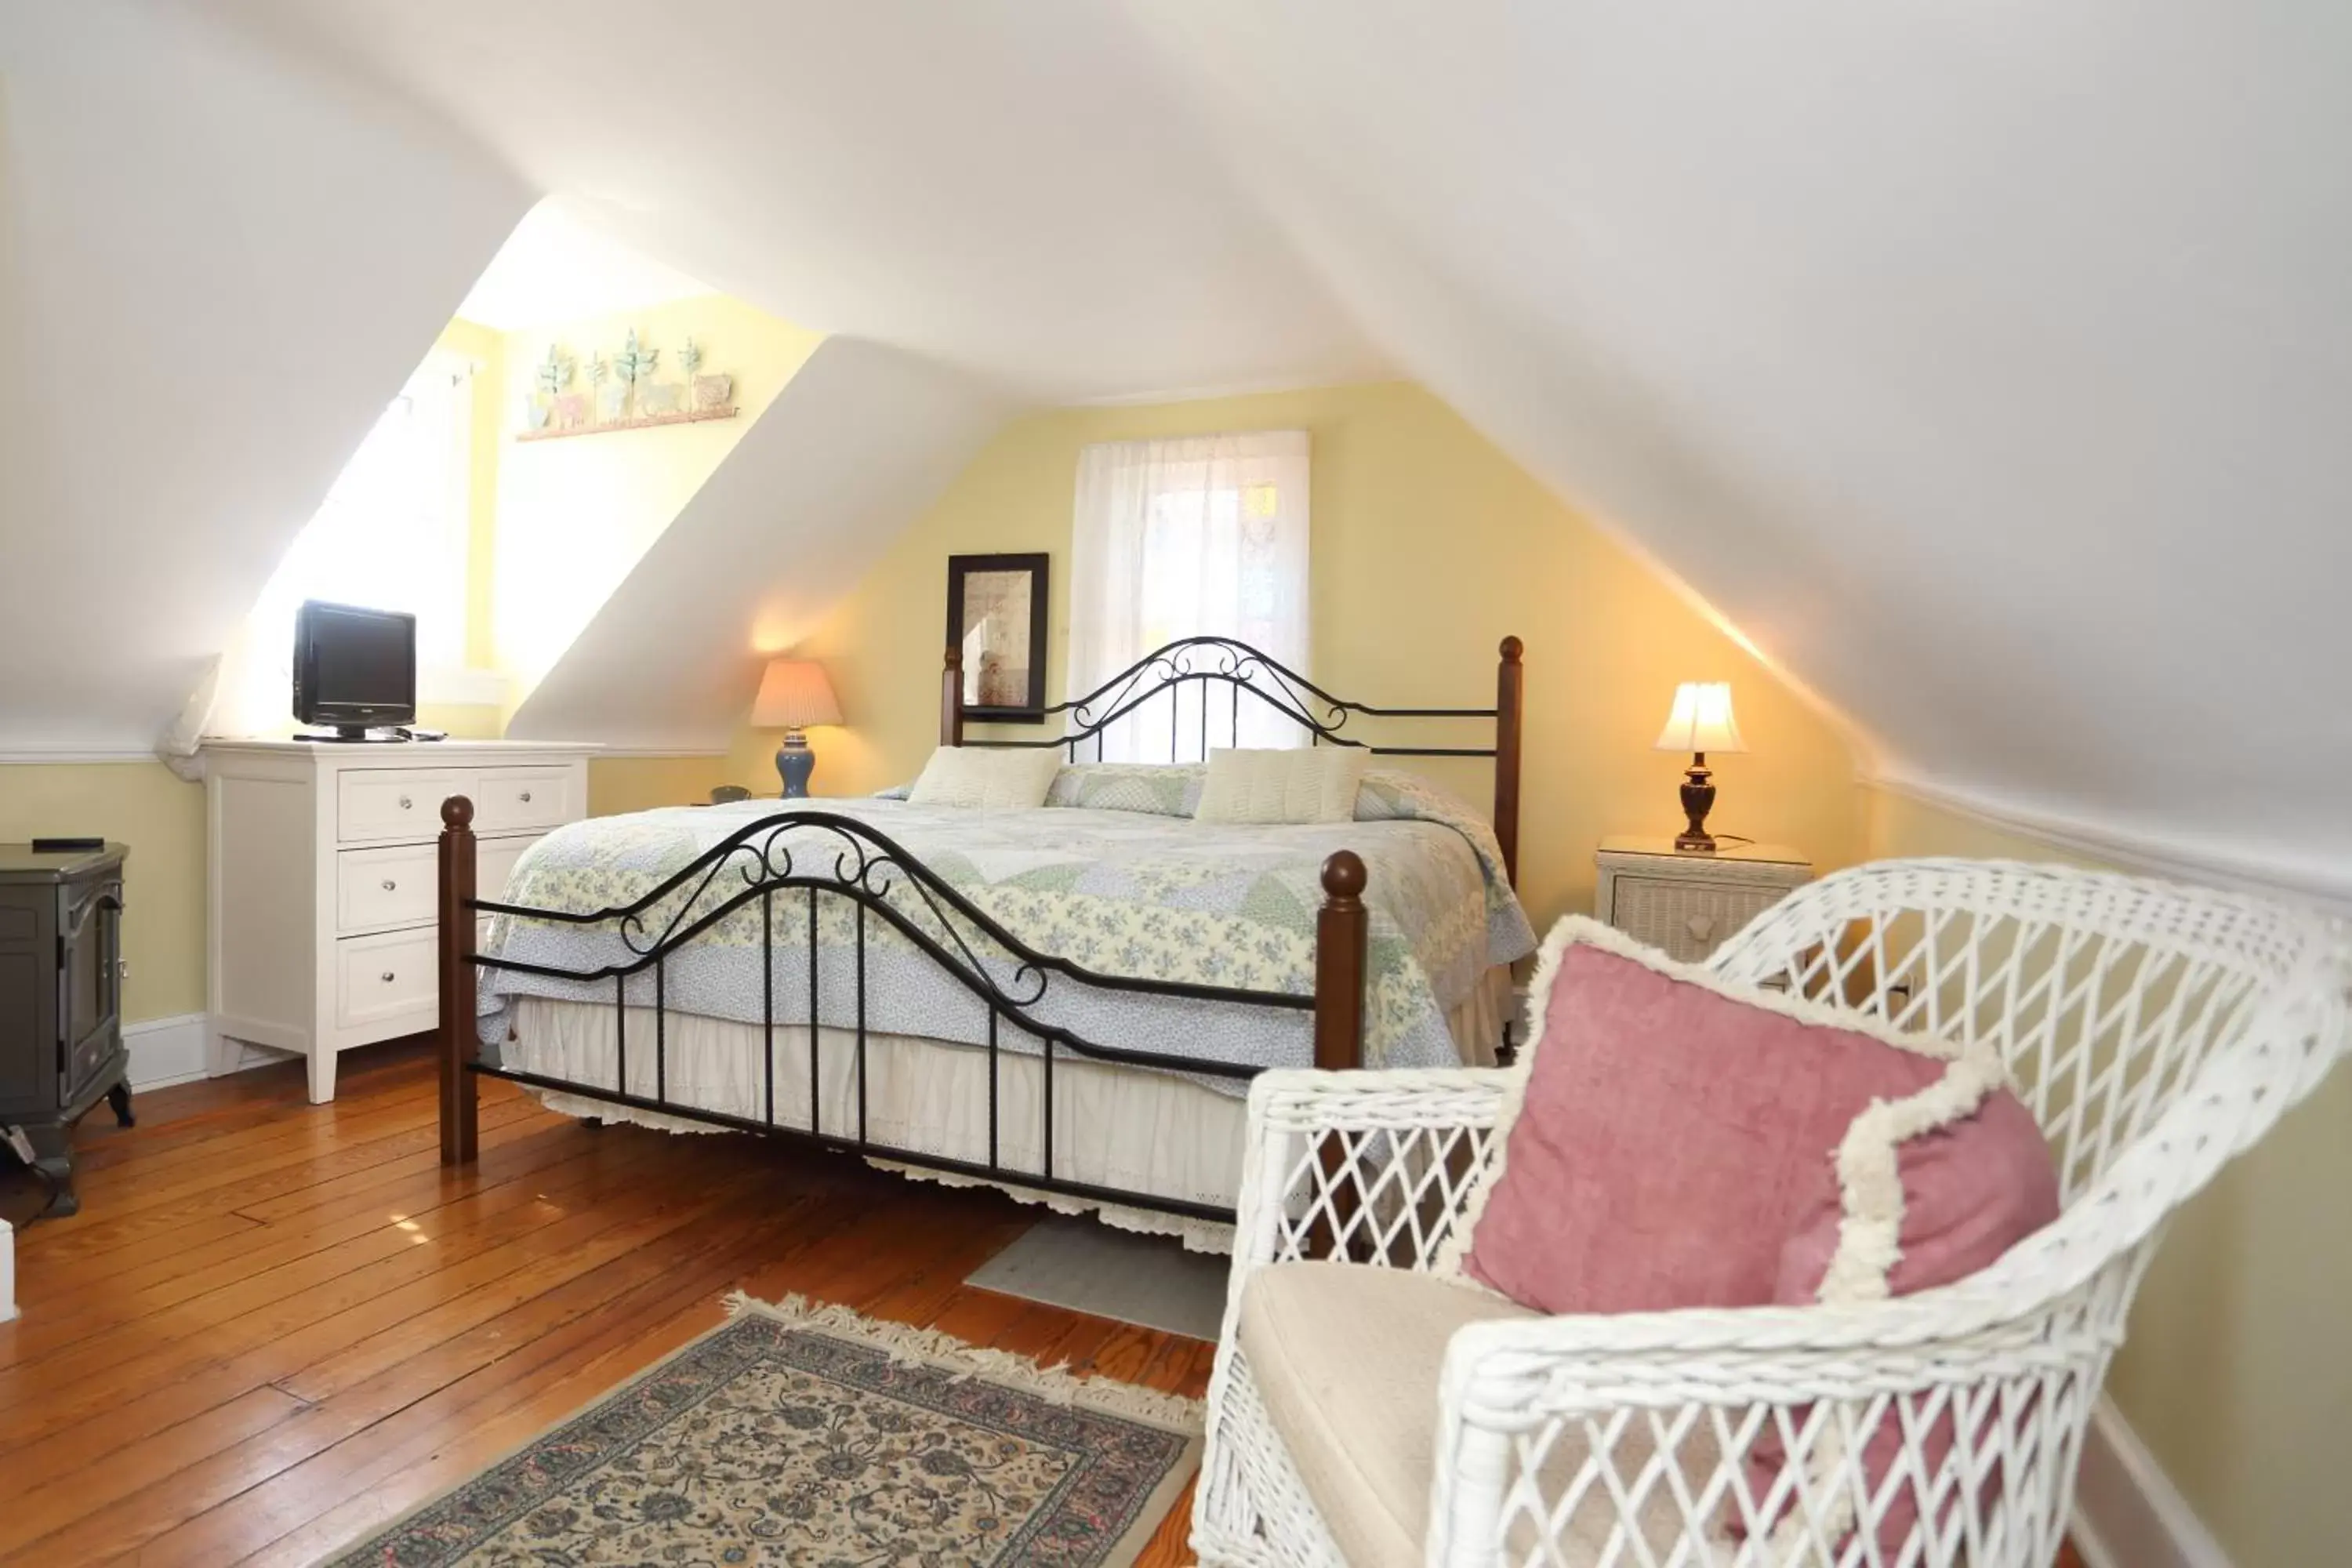 Deluxe King Room with Ocean View in Beauclaires Bed & Breakfast